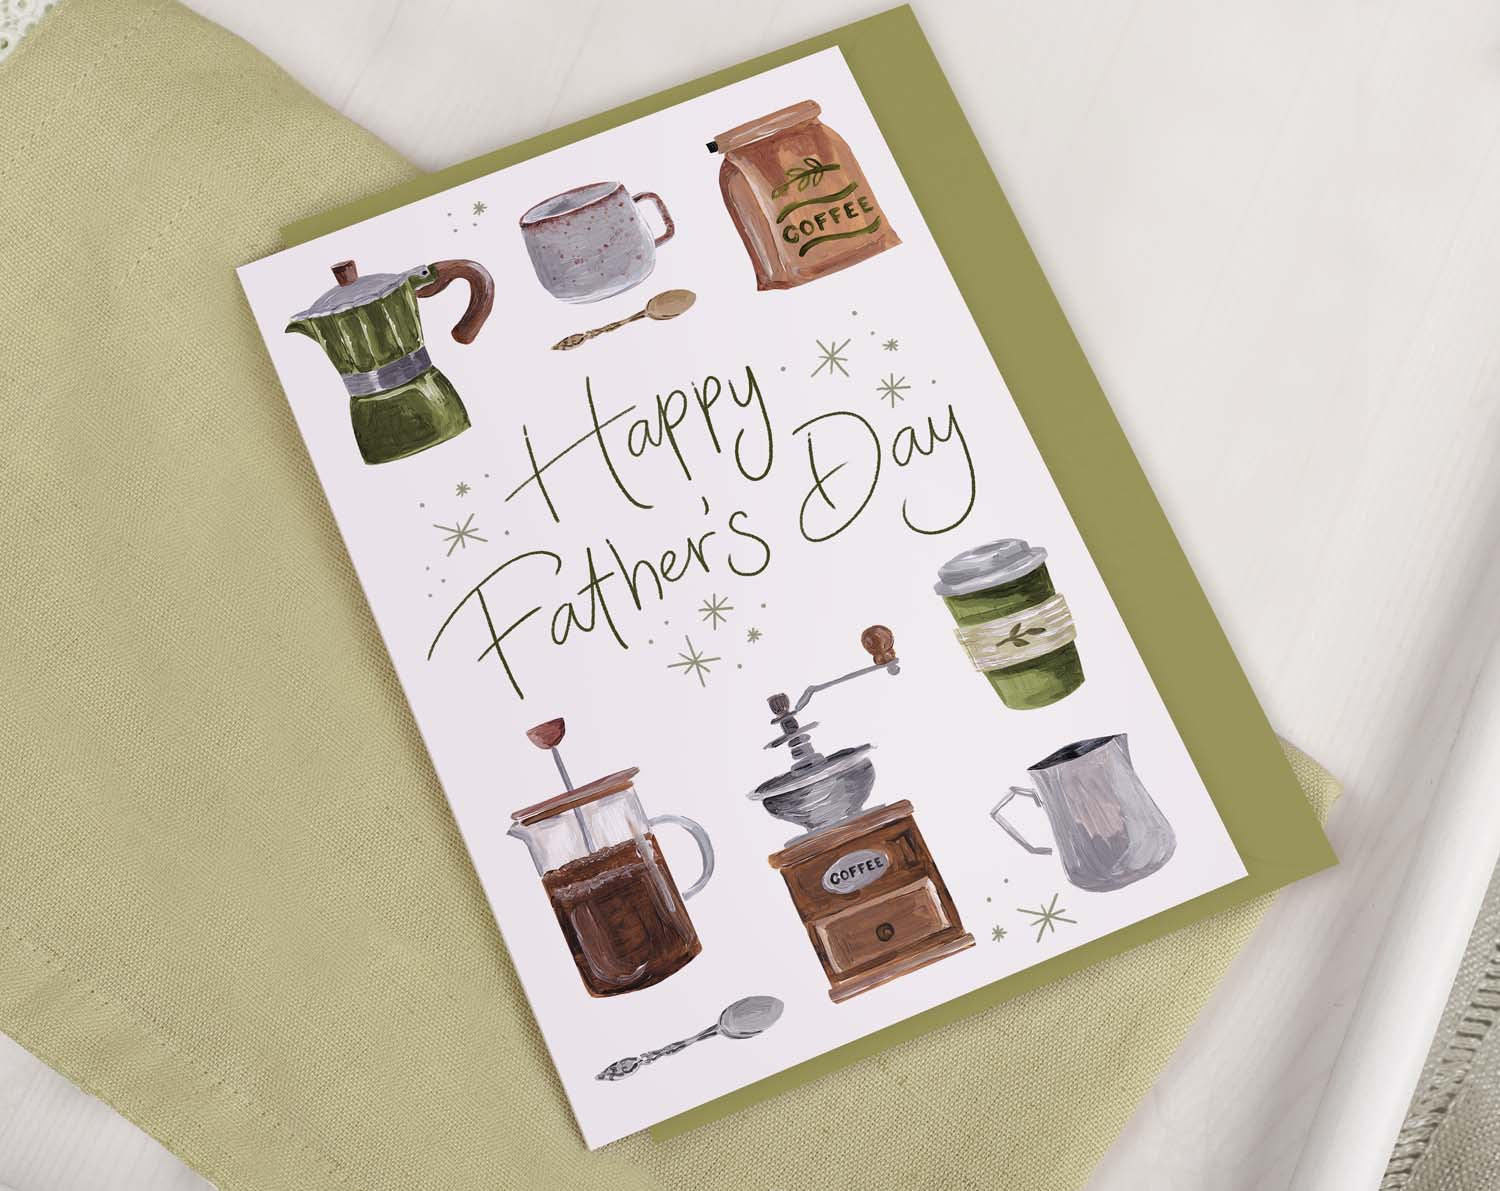 Coffee Brewing Father's Day Card